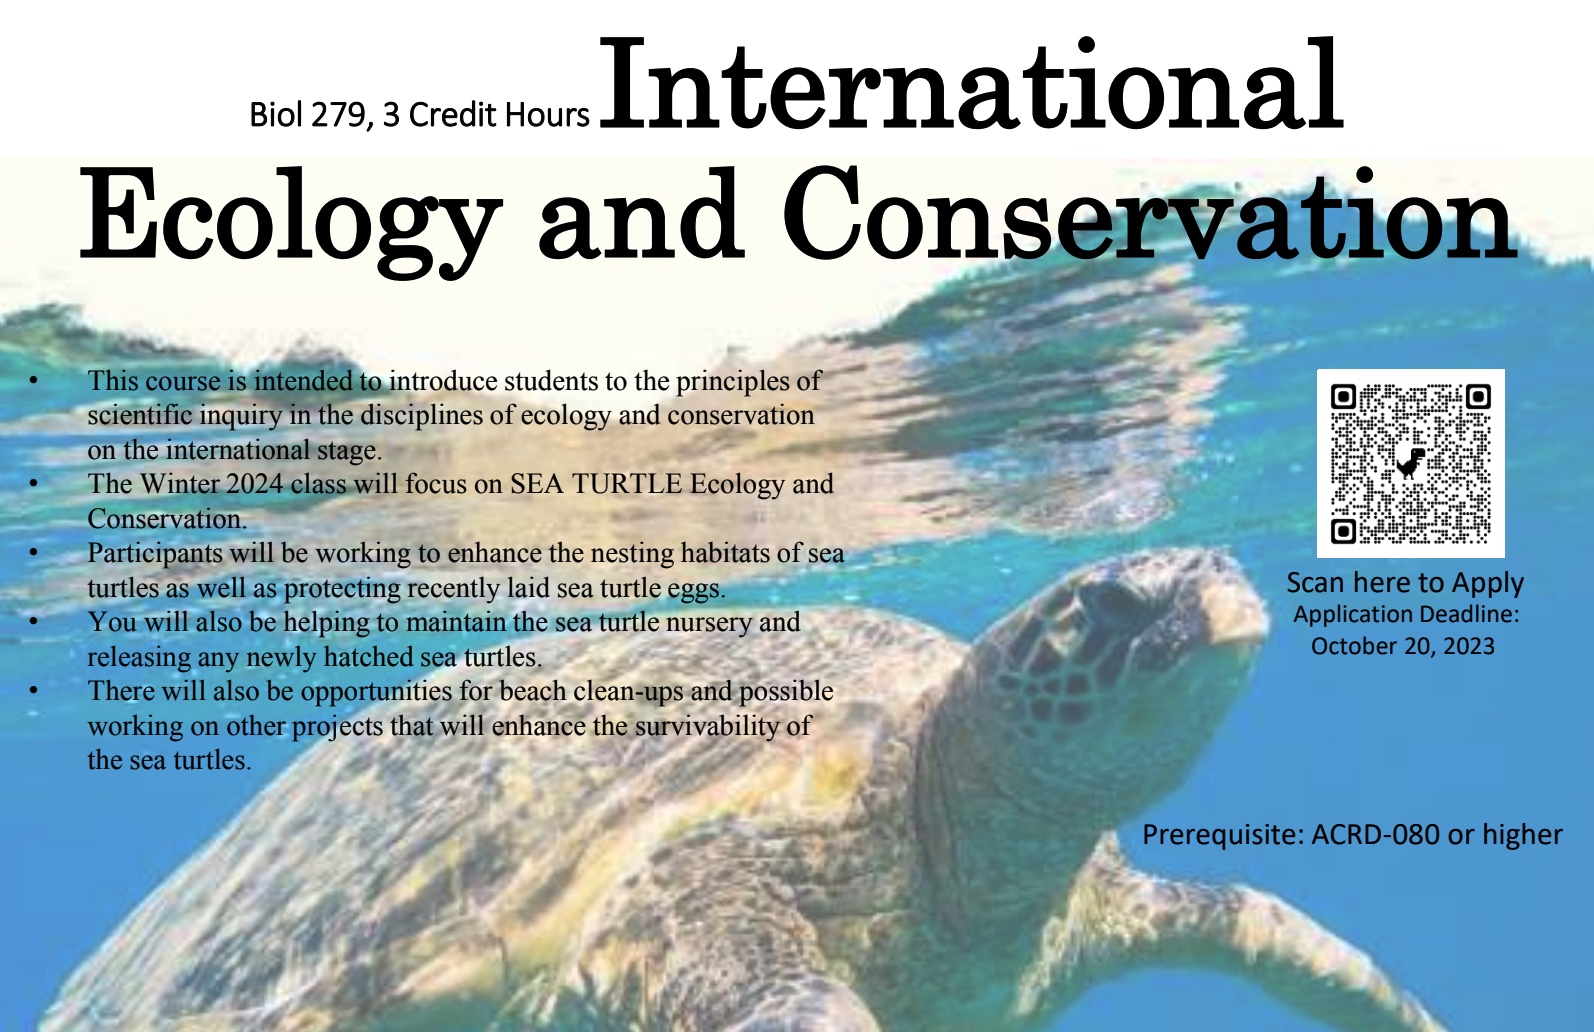 International Ecology and Conservation - sea turtle